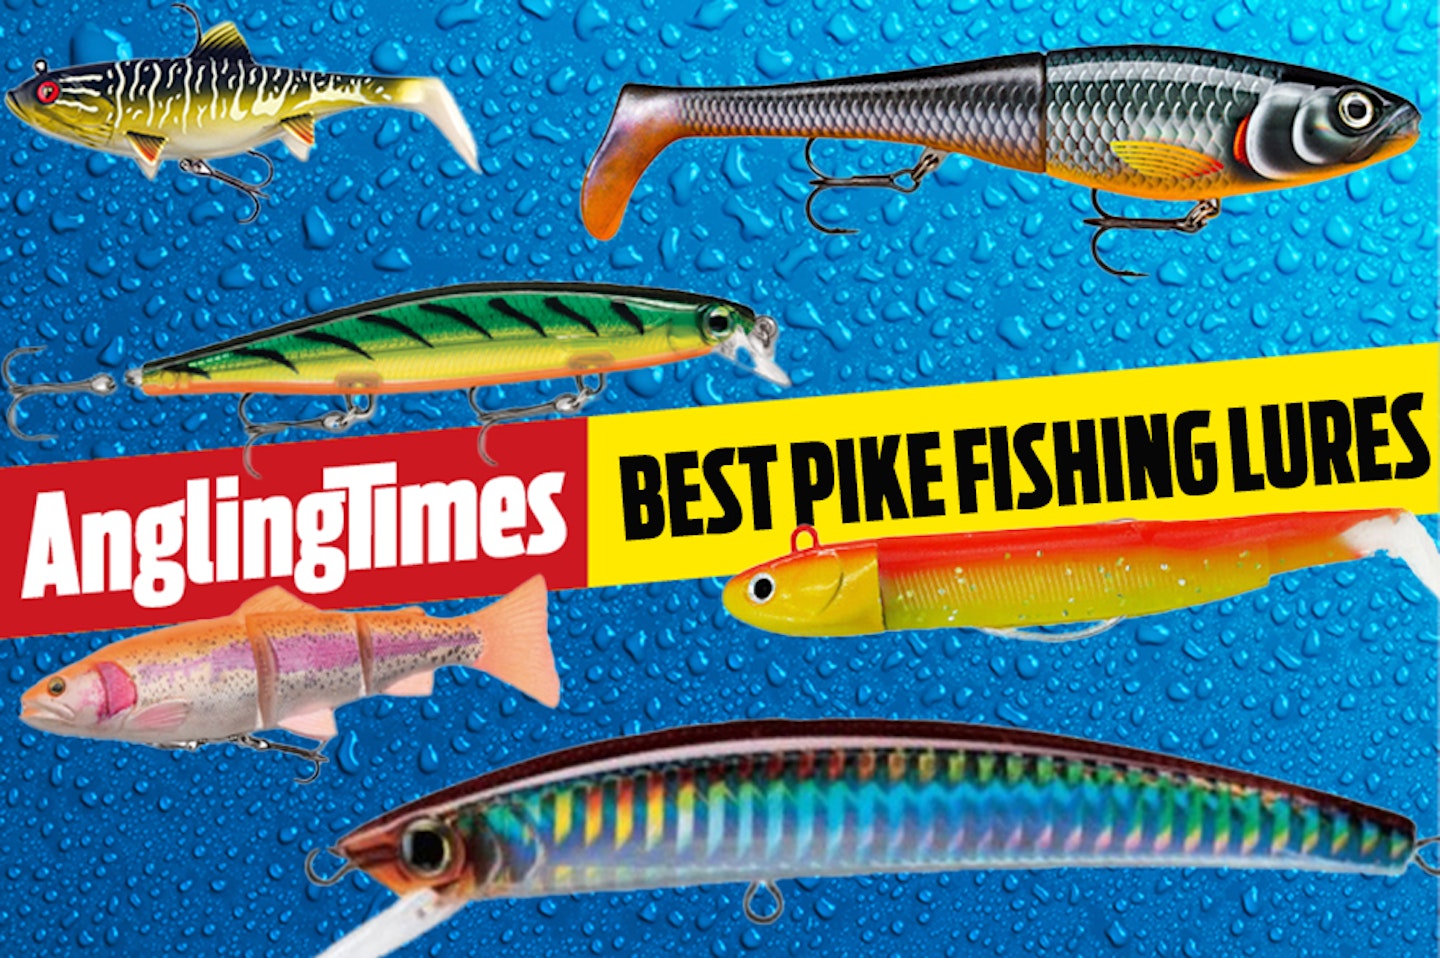 The best lures for pike fishing